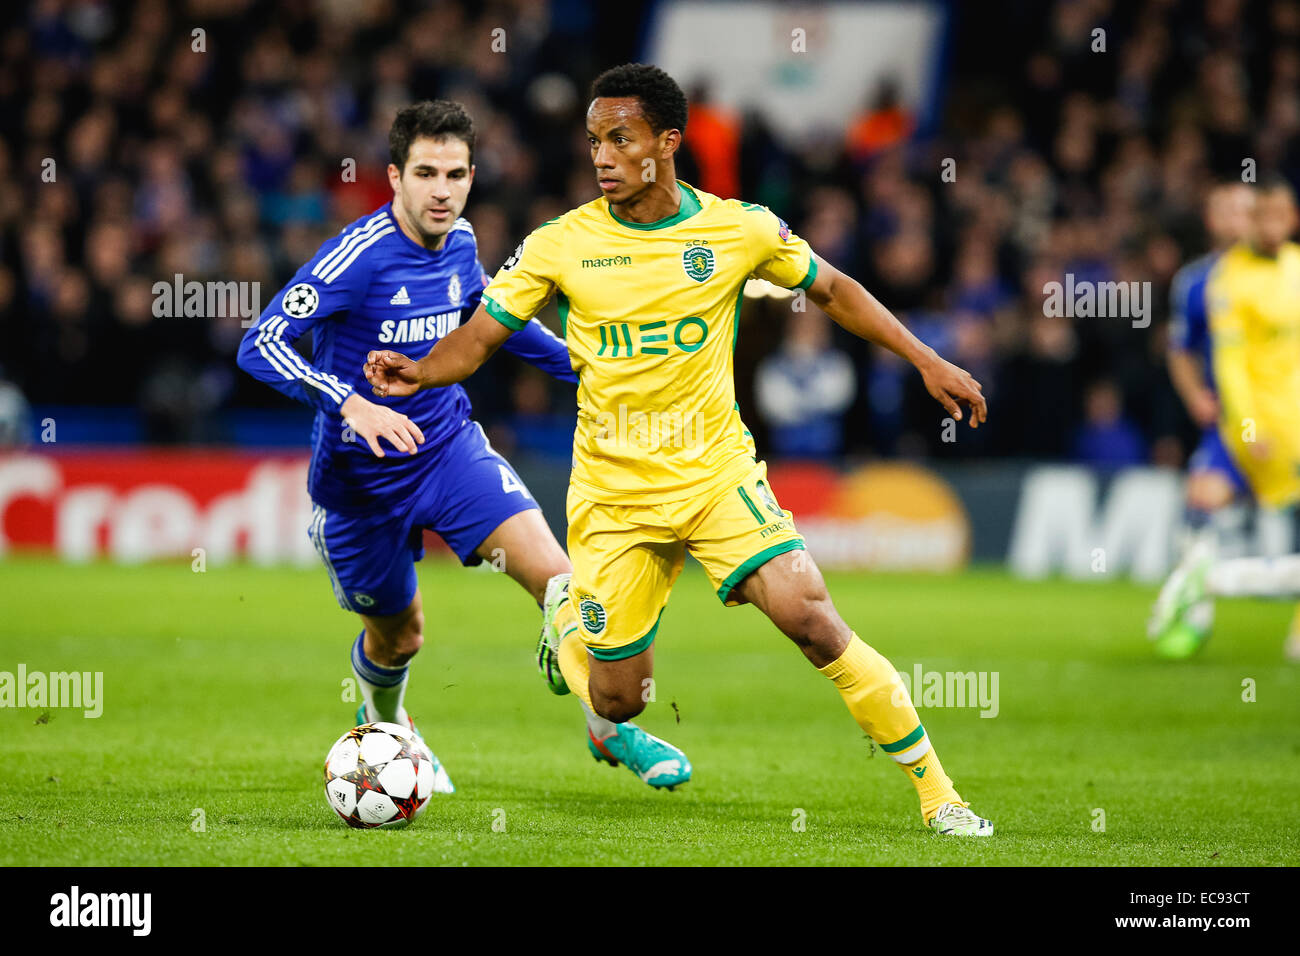 London, UK. 10th Dec, 2014. Andre Carrillo (Sporting), Cesc Fabregas (Chelsea) Football/Soccer : Andre Carrillo of Sporting and Cesc Fabregas of Chelsea during the UEFA Champions League Group Stage match between Chelsea and Sporting Clube de Portugal at Stamford Bridge in London, England . Credit:  AFLO/Alamy Live News Stock Photo